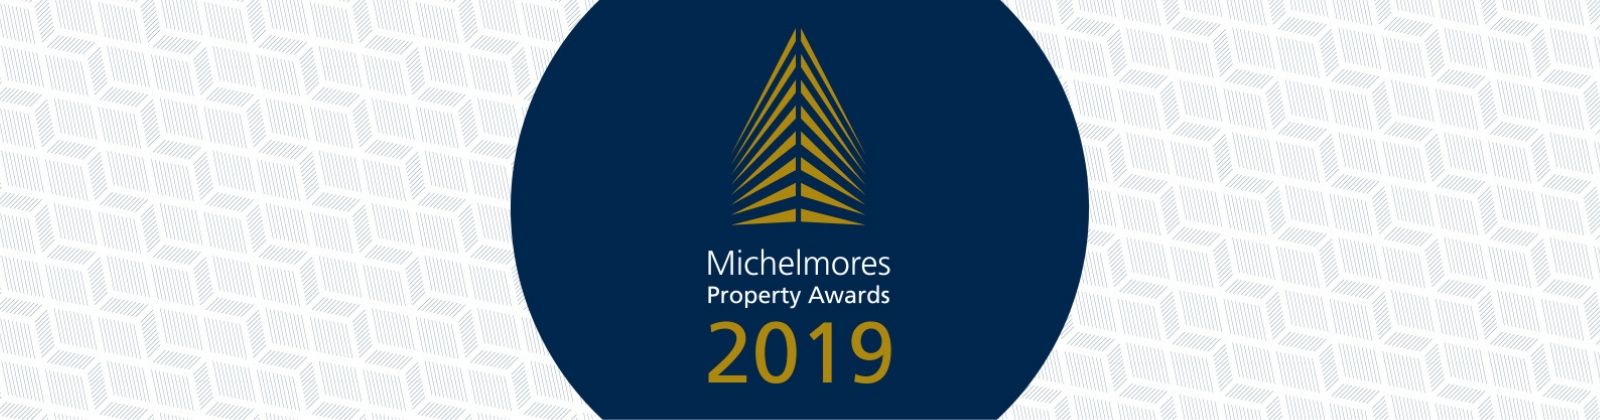 Steve Hindley CBE wins the John Laurence Special Contribution Award at the 2019 Michelmores Property Awards